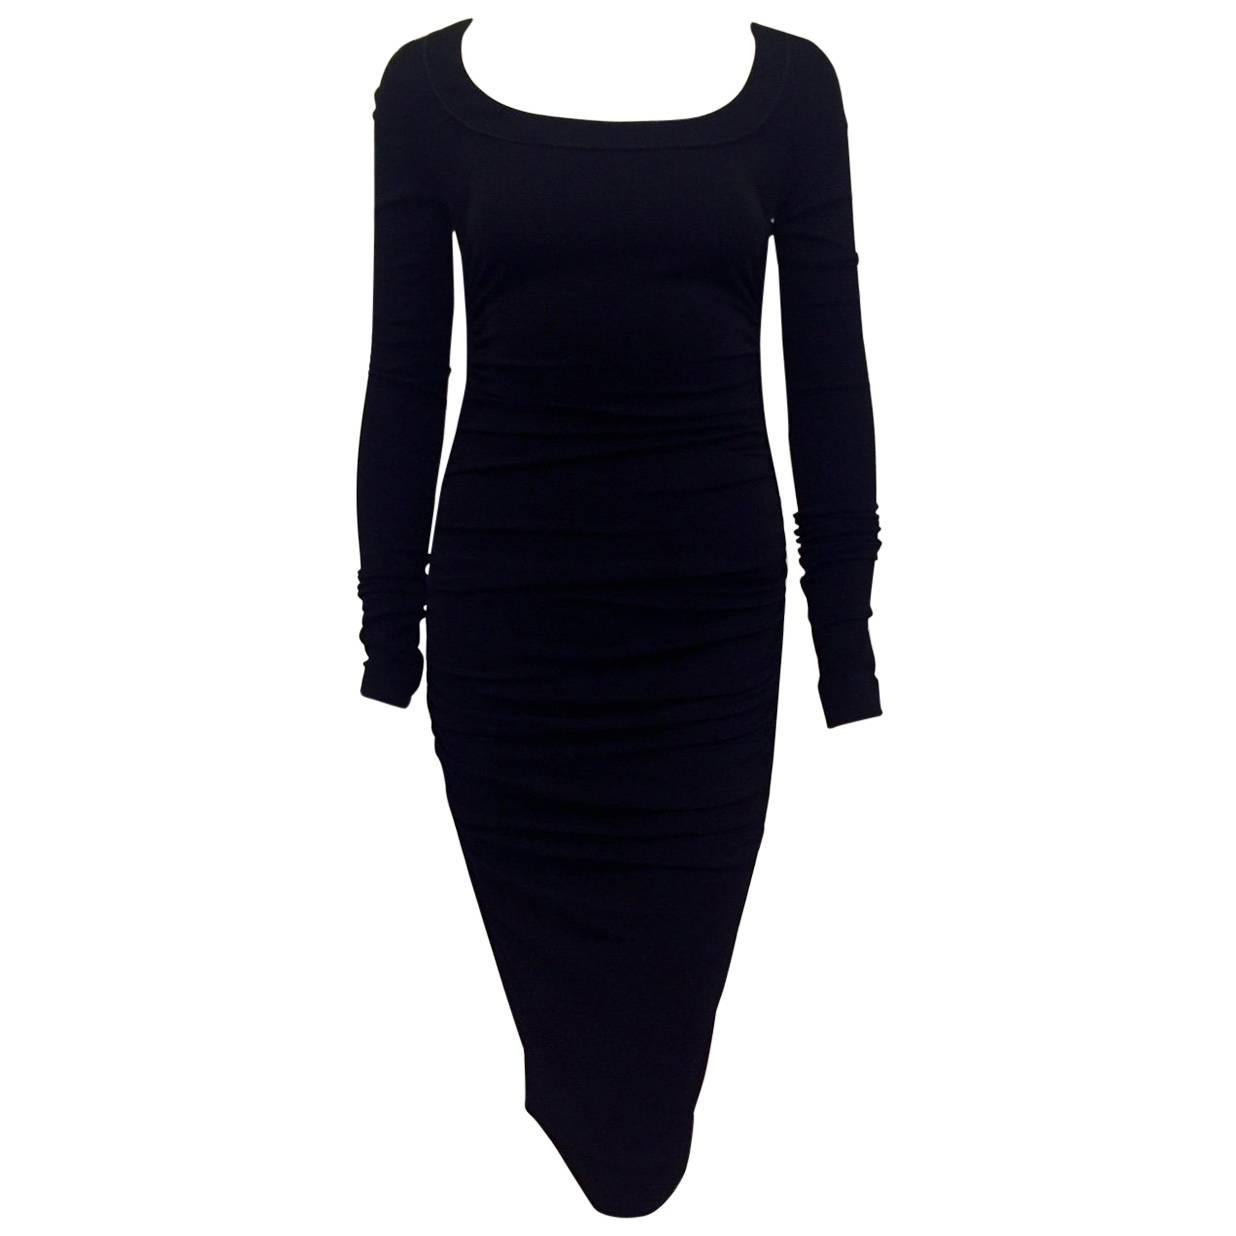 Dolce & Gabbana Black Ruched Stretch Viscose Cocktail Dress With Satin Piping